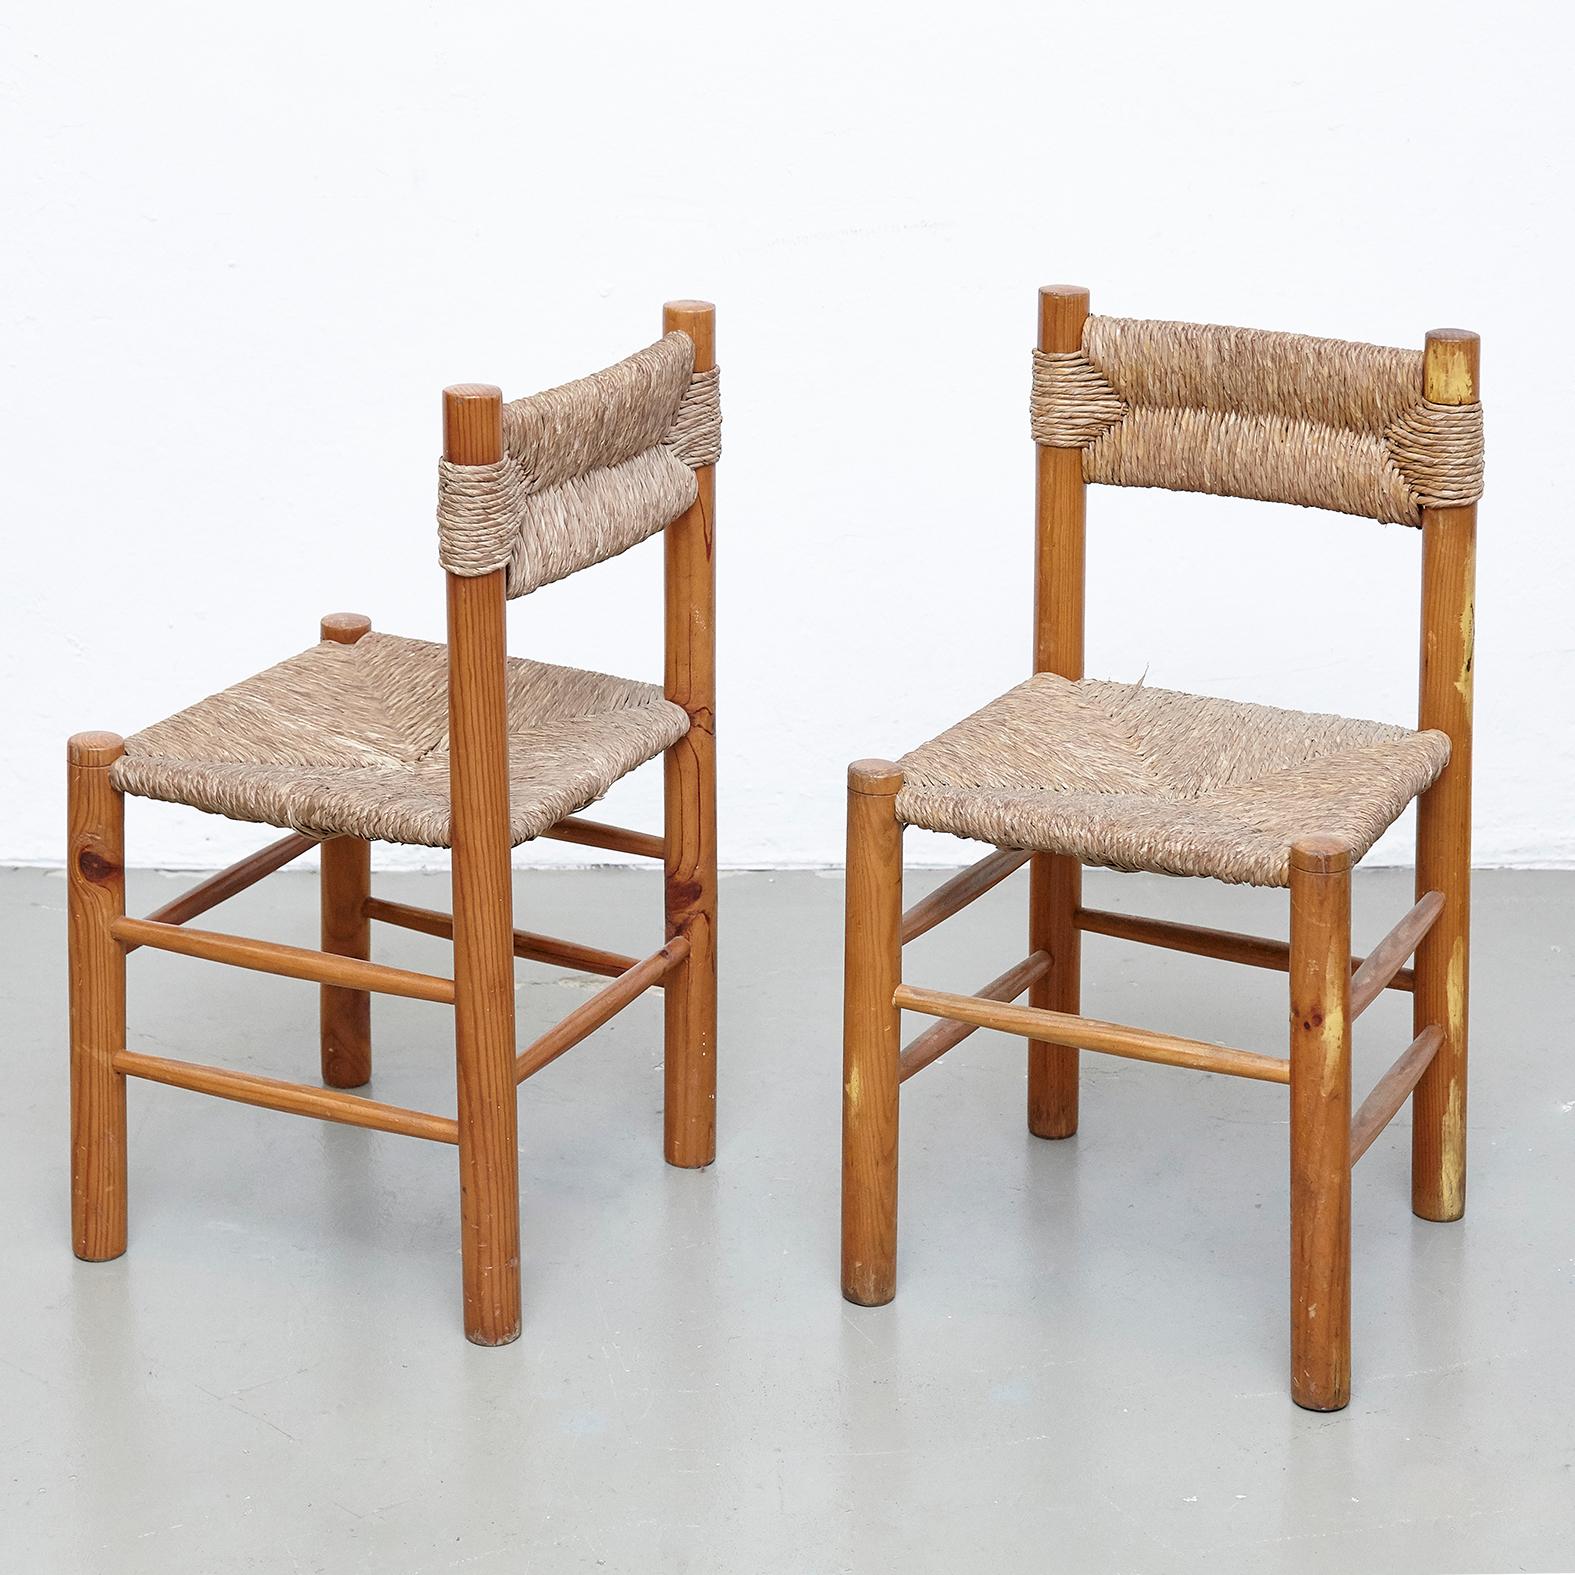 Chairs designed in the style of Charlotte Perriand, made by unknown manufacturer.

Wood and rattan.

In good original condition, with minor wear consistent with age and use, preserving a beautiful patina.